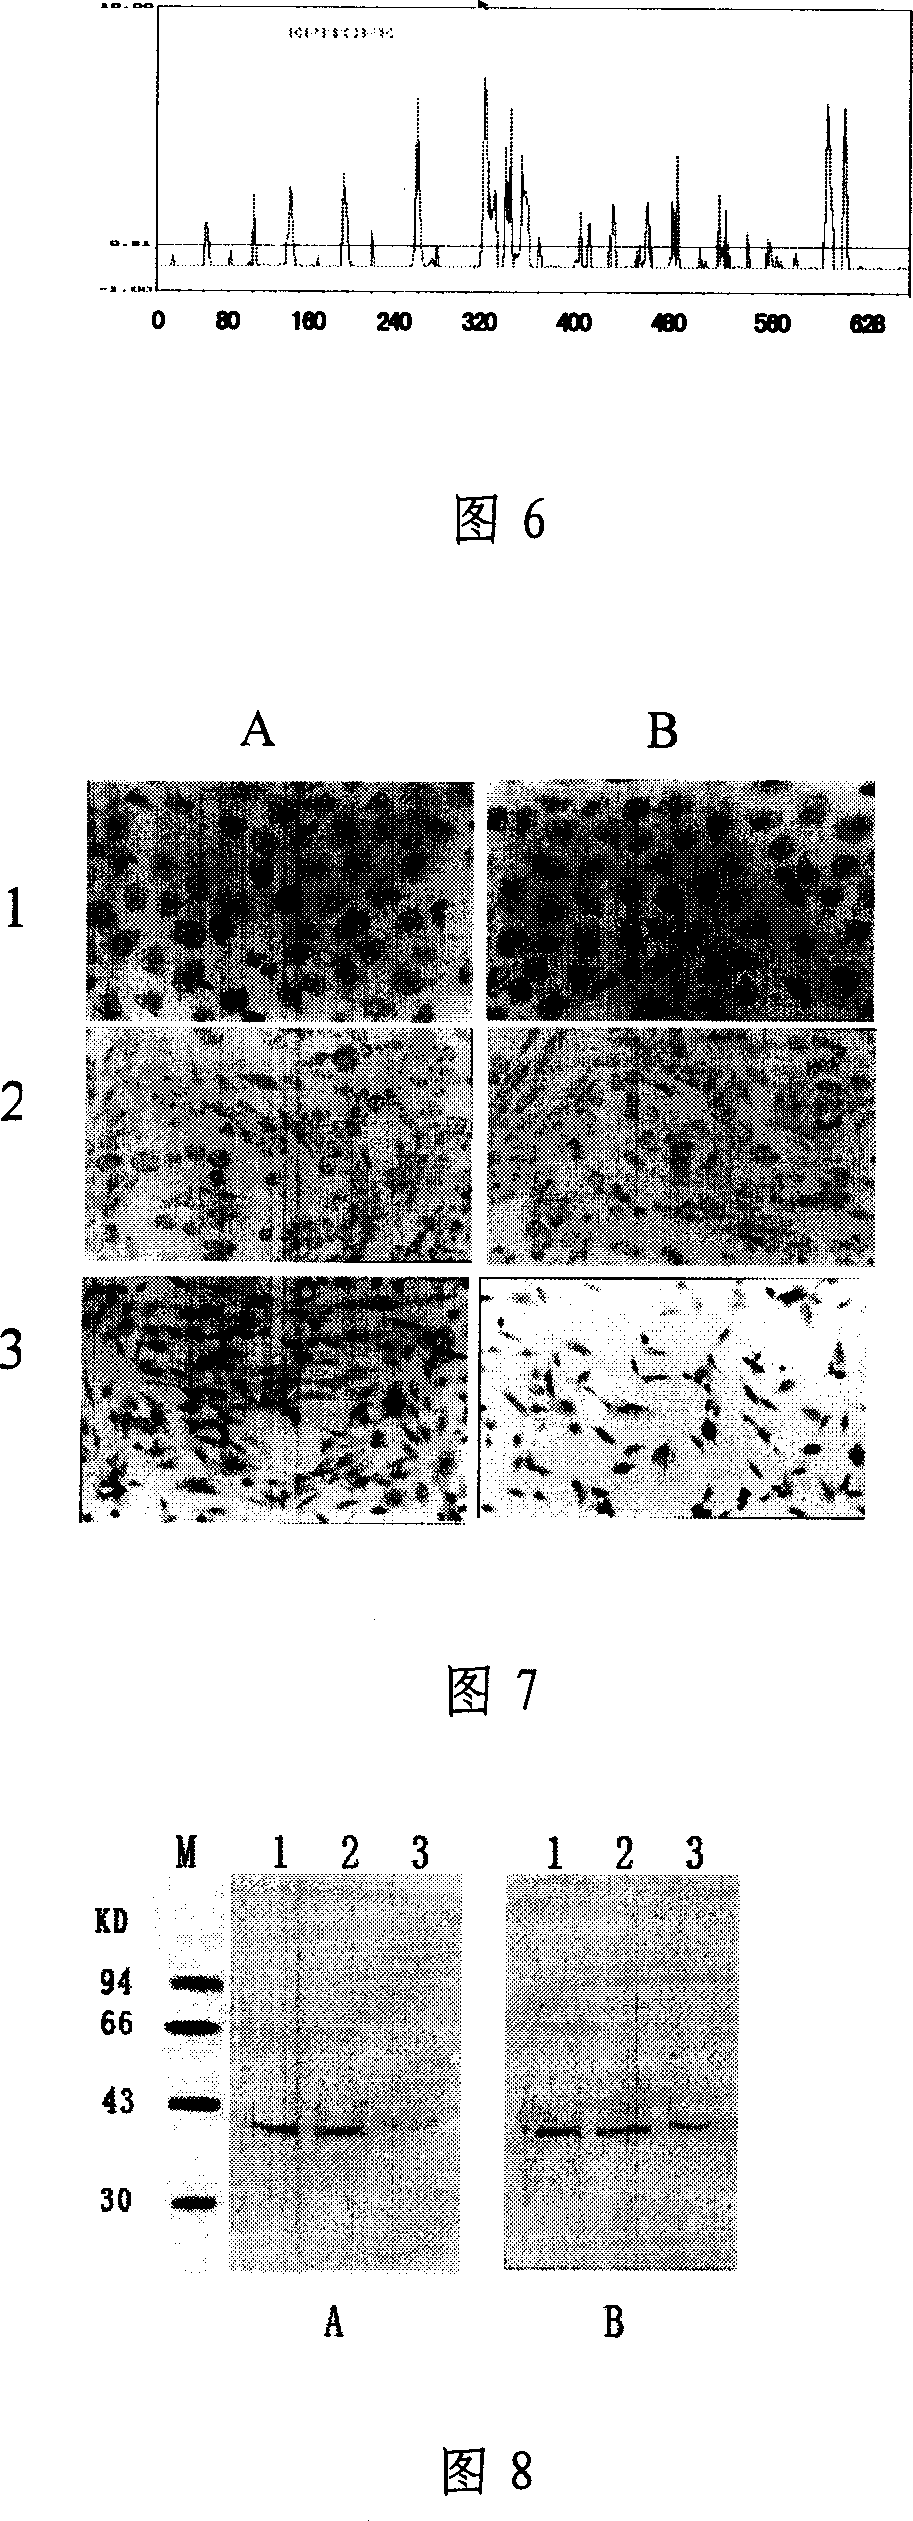 Method of preparing monoclonal antibody against human soluble mesothelin related protein